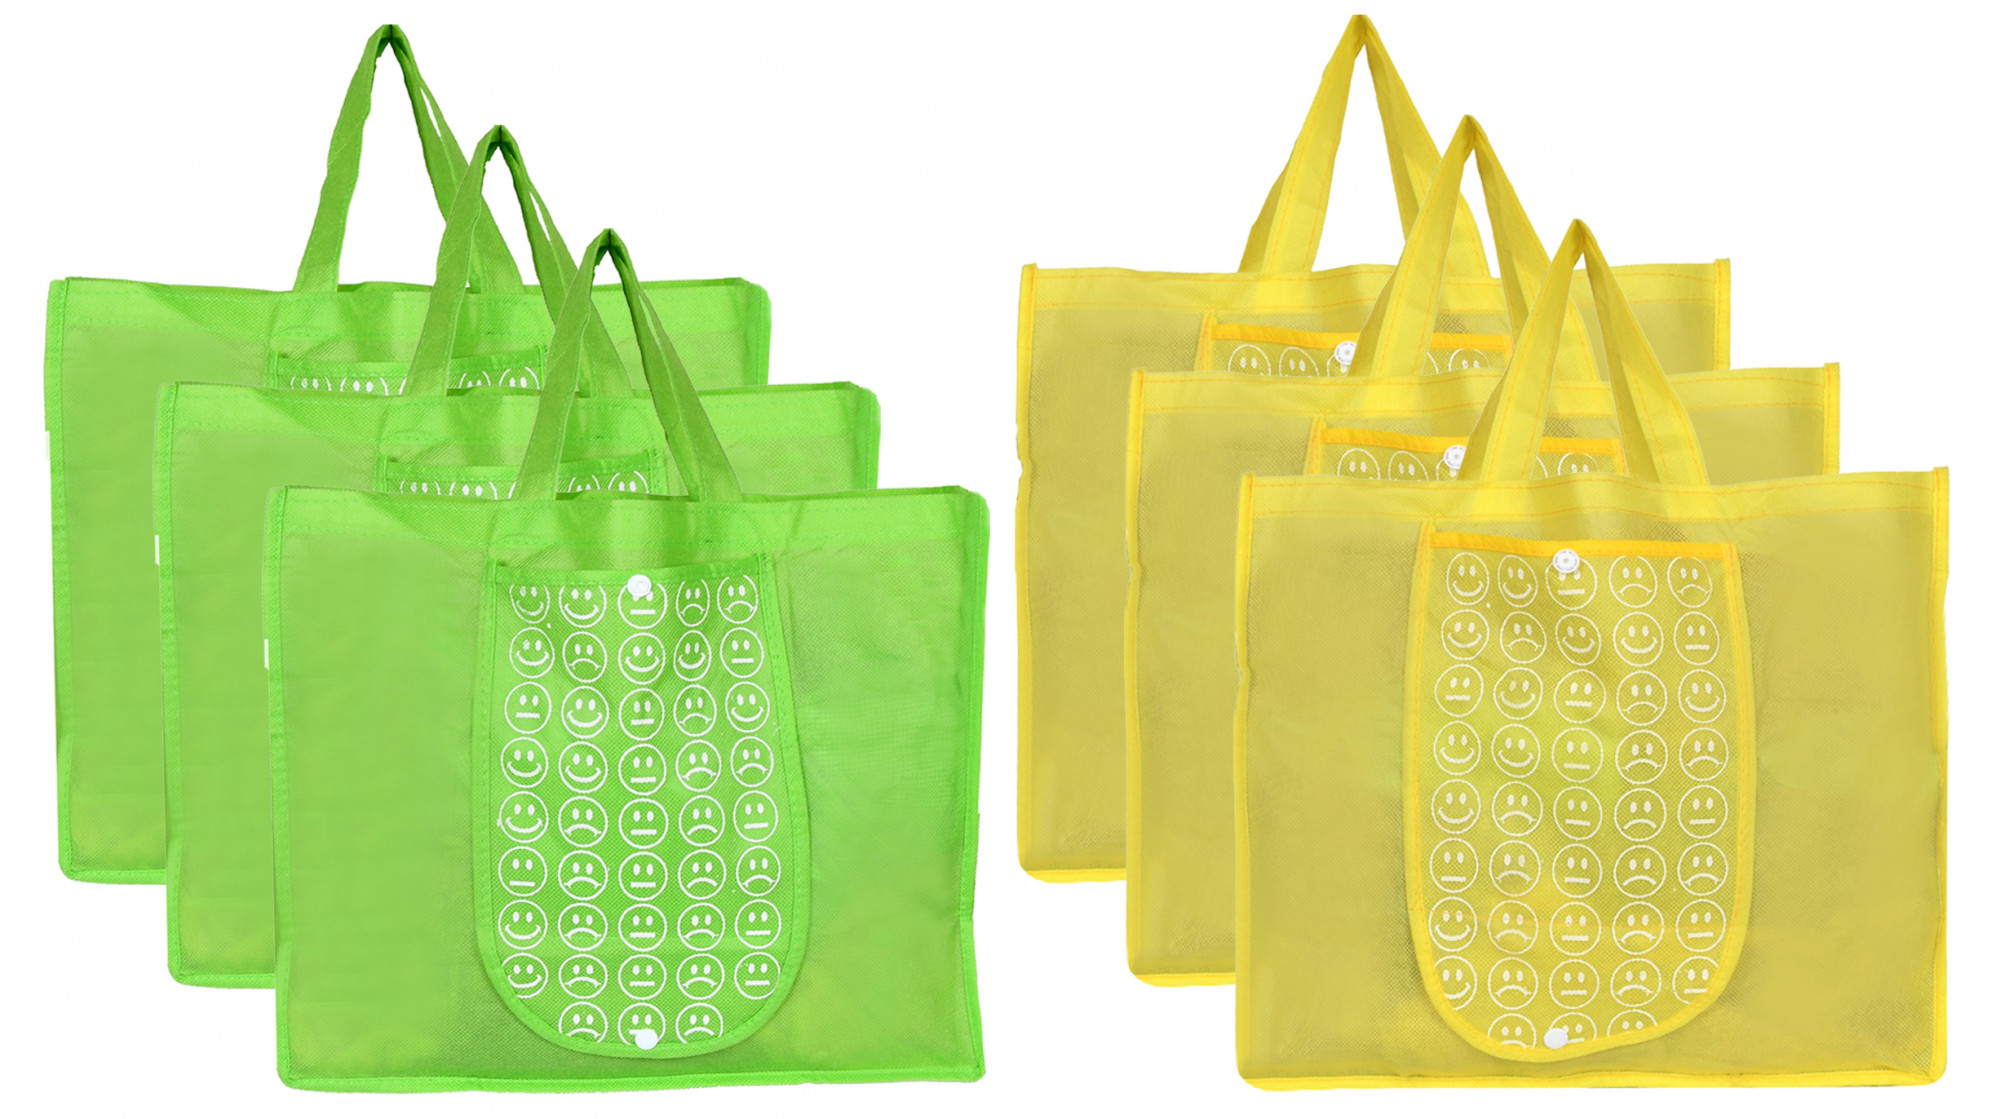 Kuber Industries Shopping Grocery Bags Foldable, Washable Grocery Tote Bag with One Small Pocket, Eco-Friendly Purse Bag Fits in Pocket Waterproof & Lightweight (Green & Yellow)